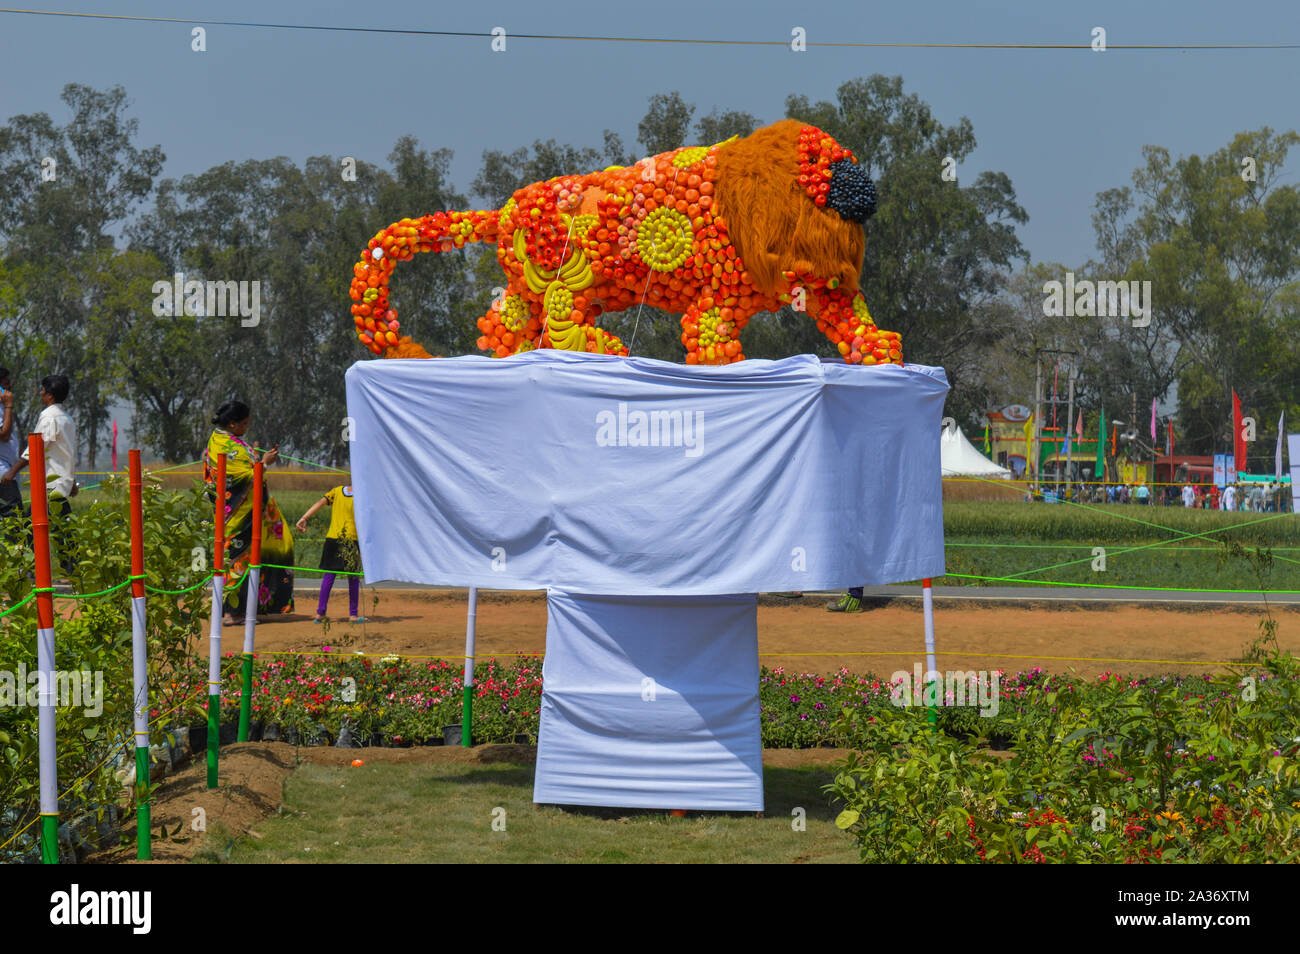 A statue of indian lion which is made of cotton and fruit showcase on the agriculture festival, pusa, New Delhi. Stock Photo